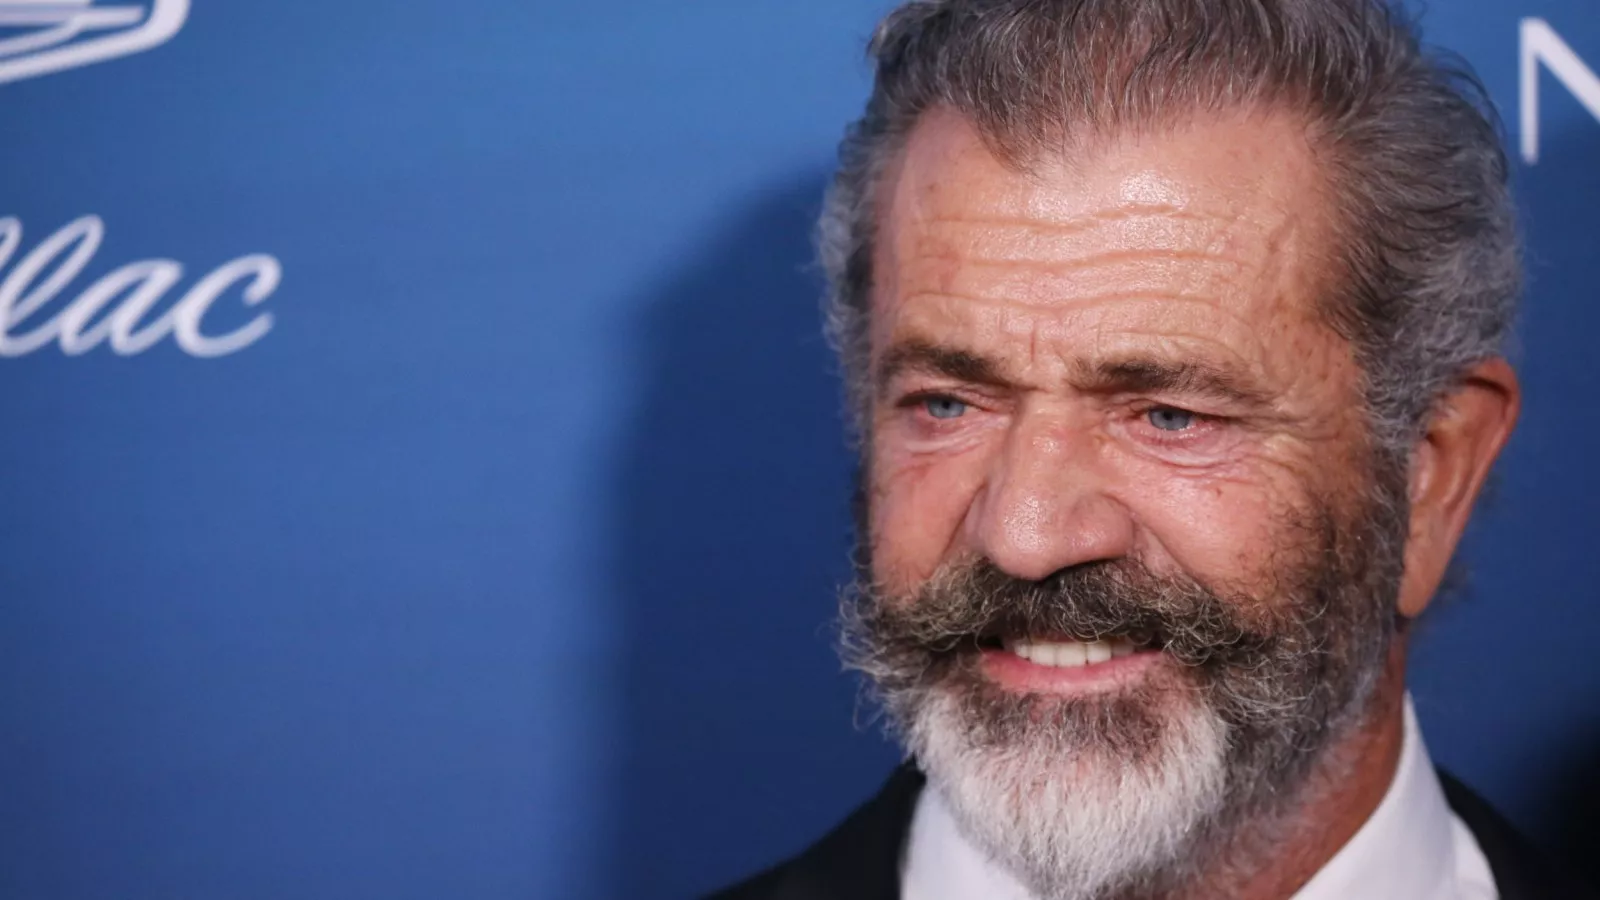 Fact Check: Is Mel Gibson Making Movie About the Rothschild Family?